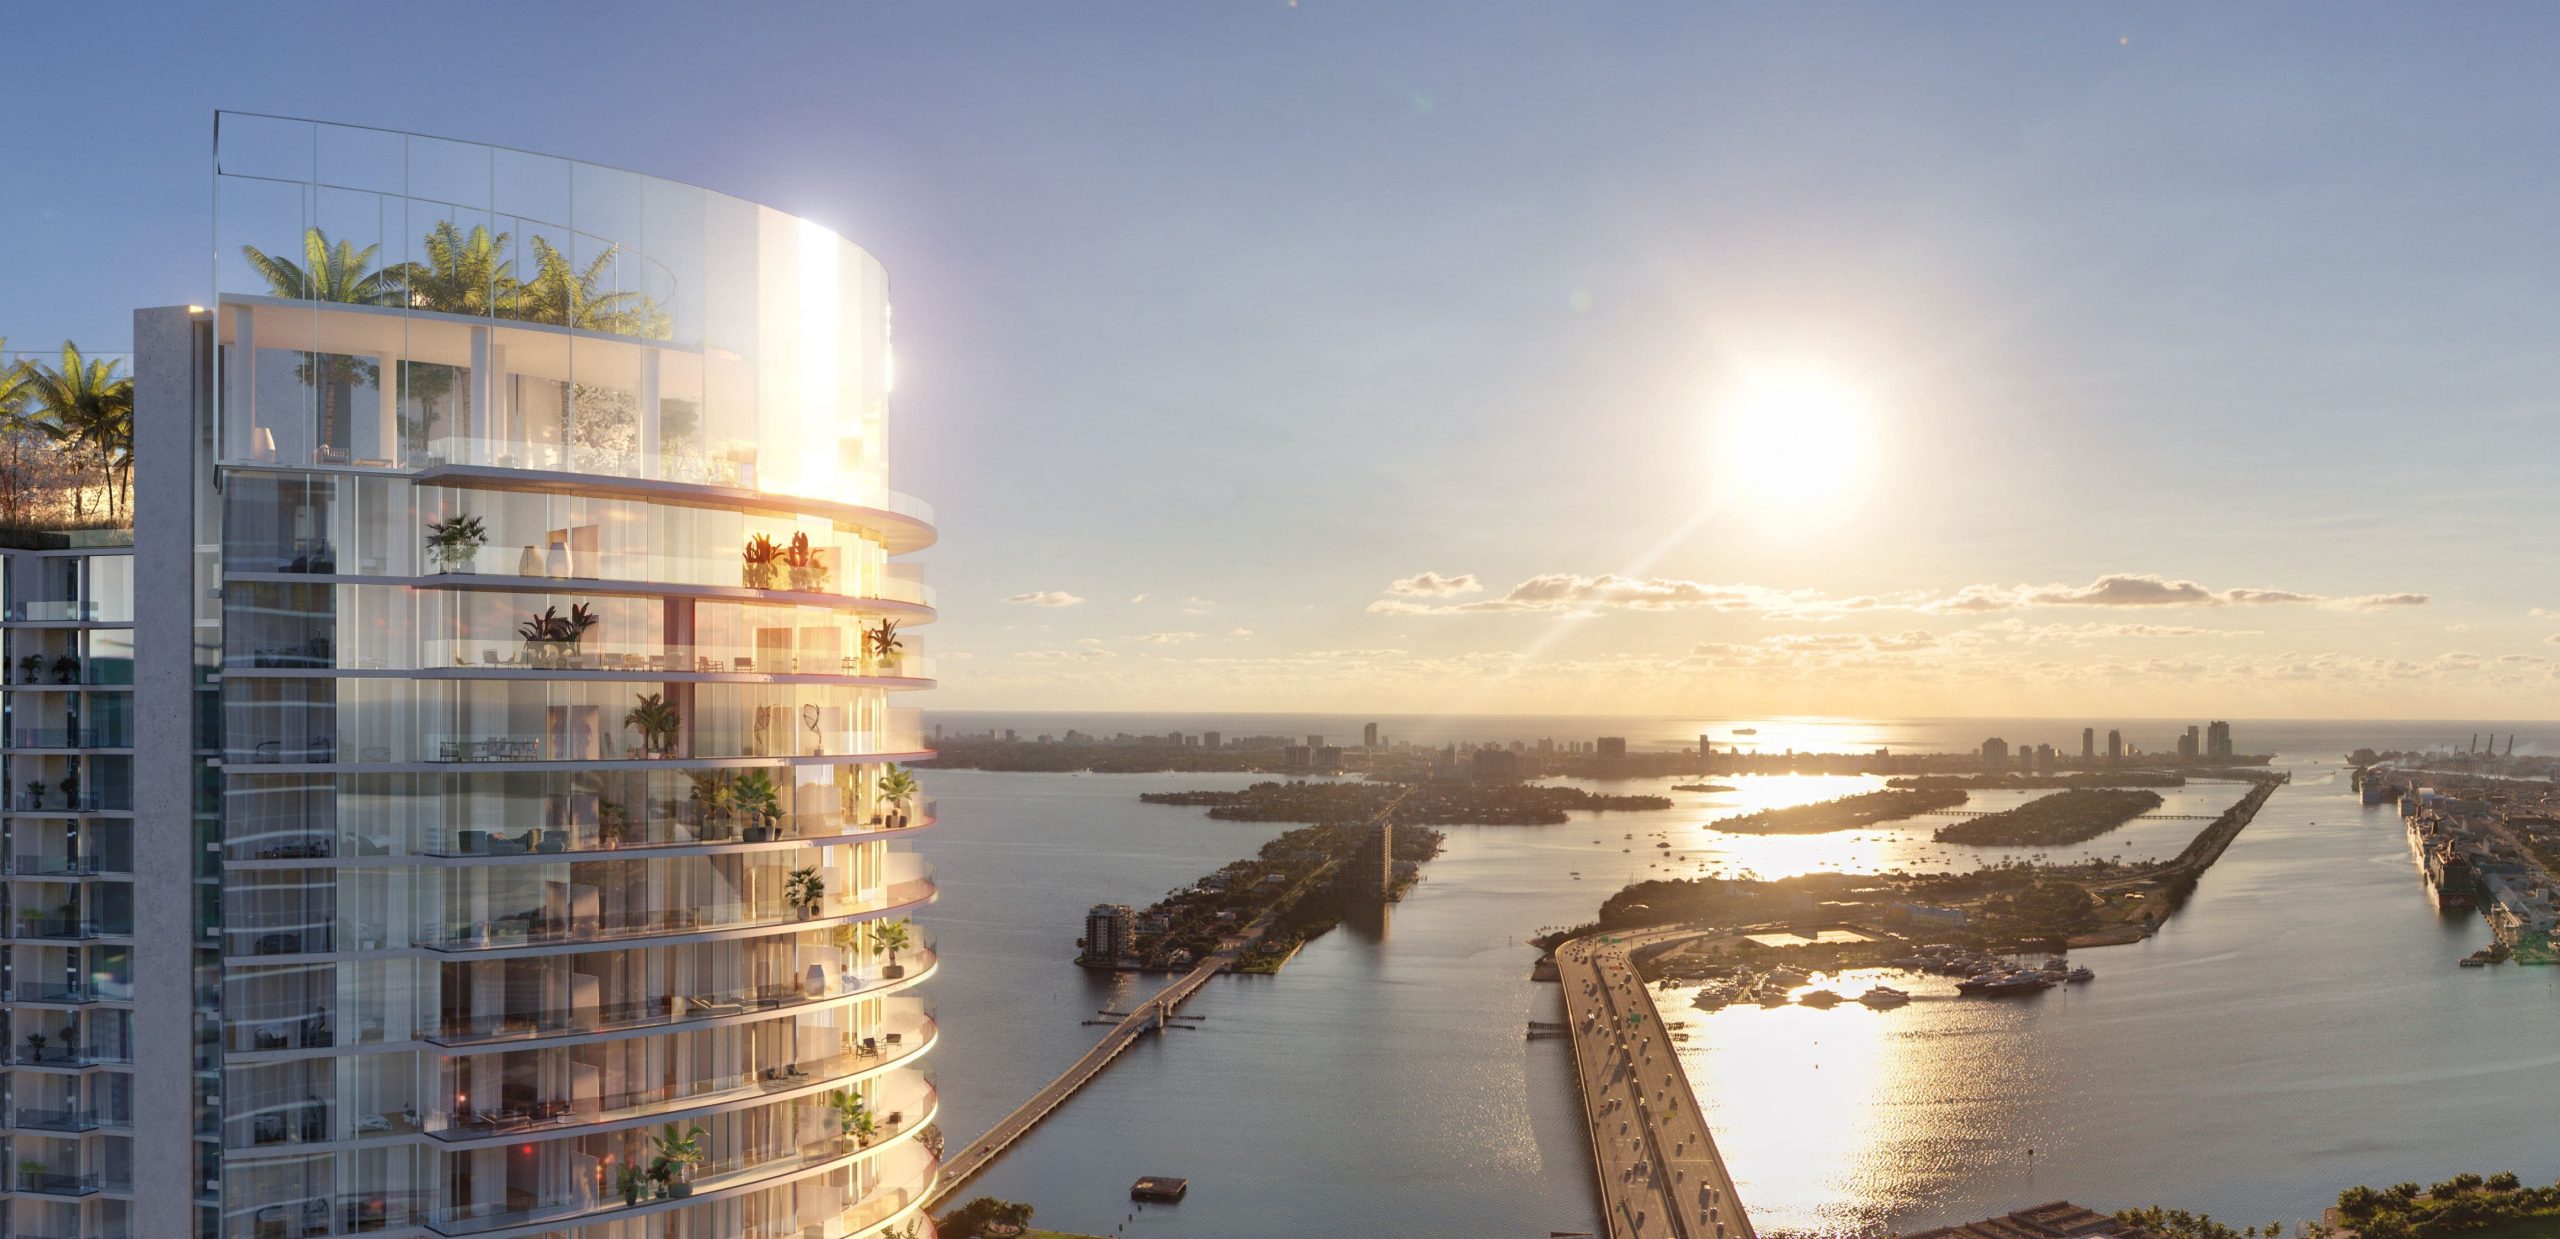 New Development Proposed in Downtown Miami with Over 1,400 Residential